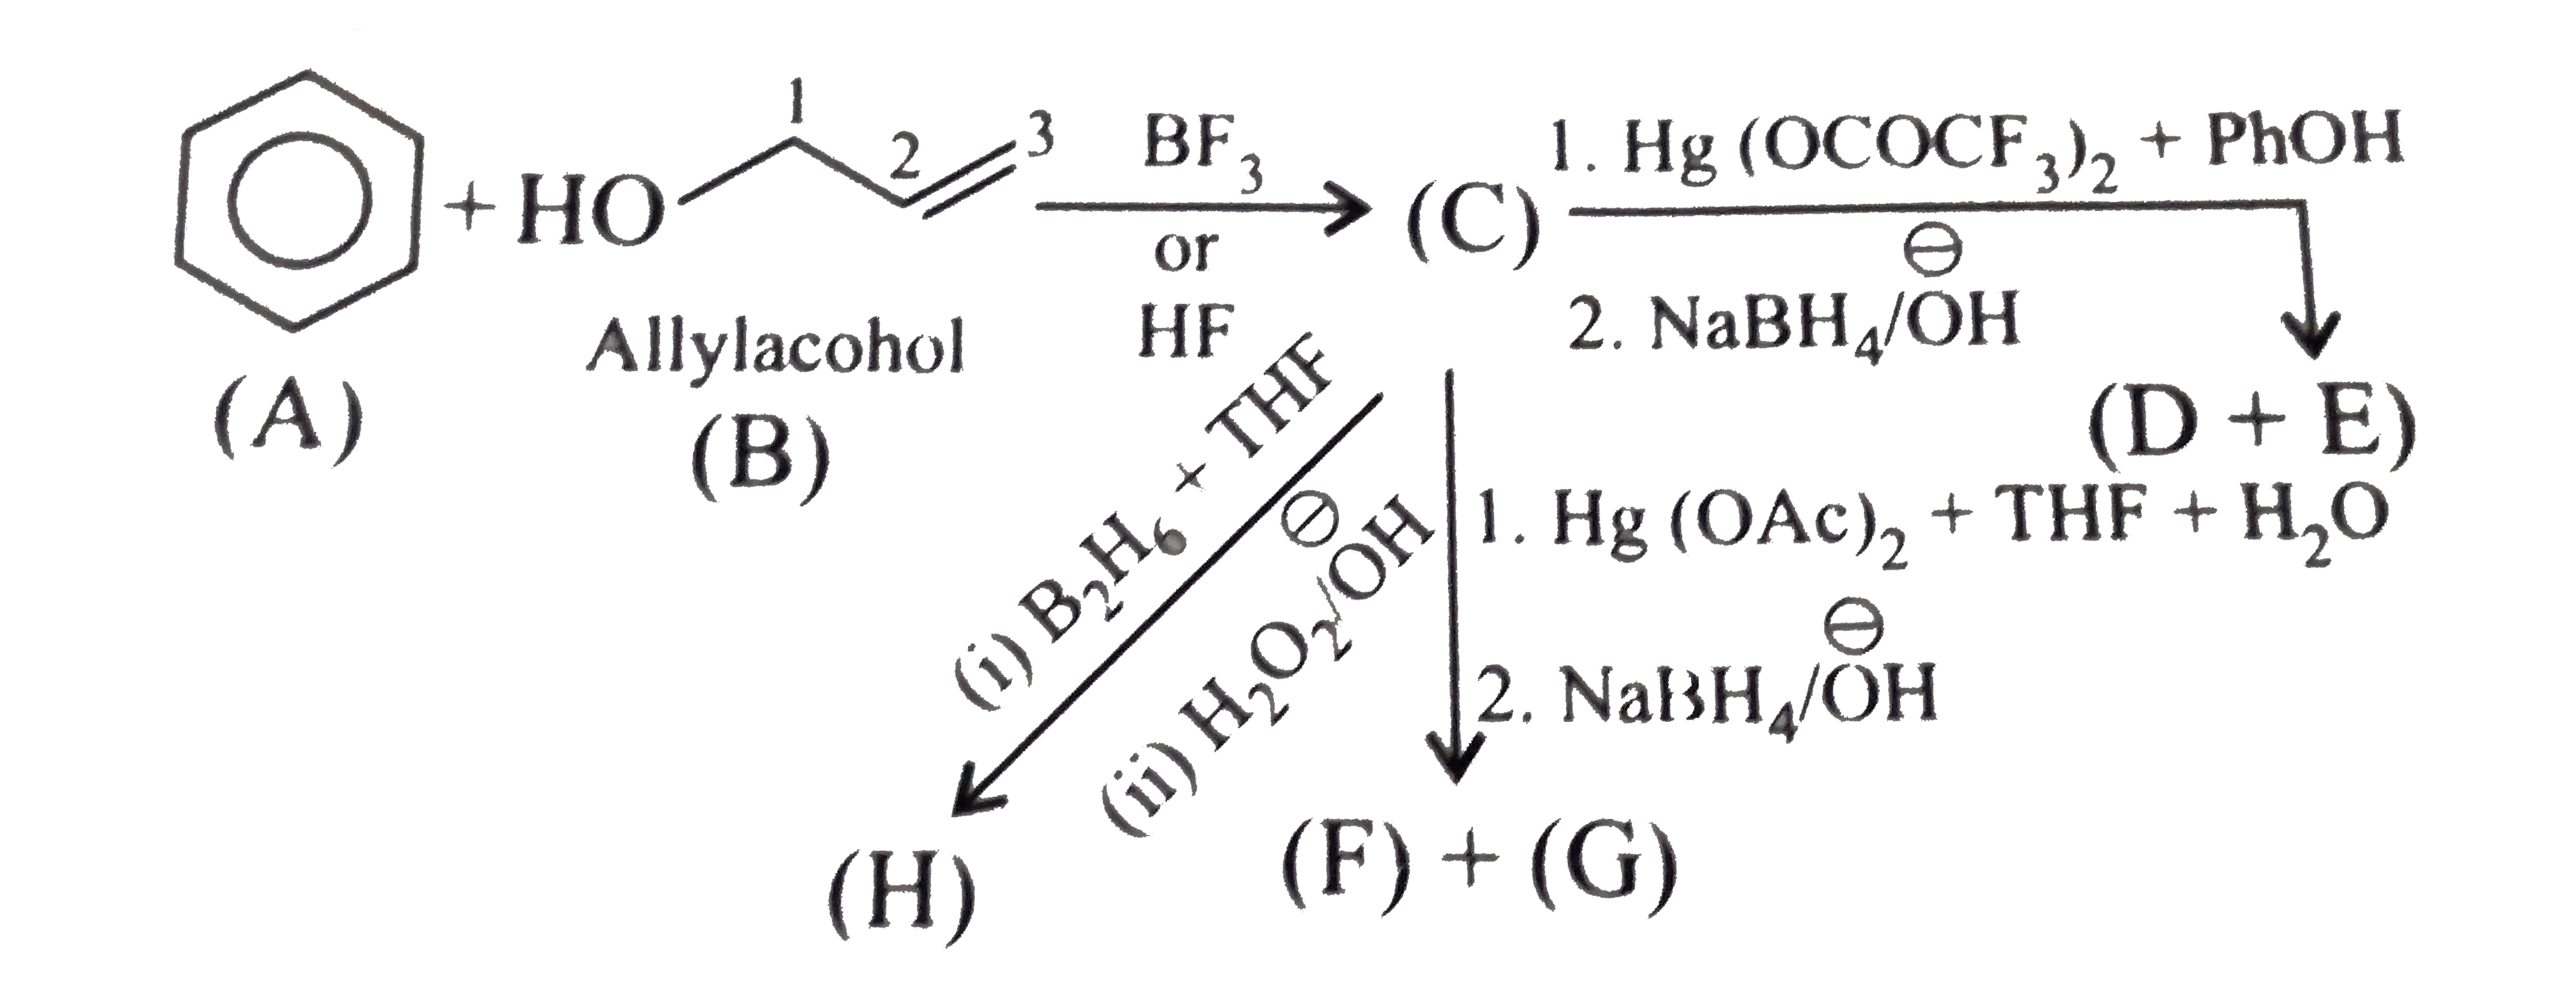 The reaction (C ) to (D) and (E ) is called alkoxy mercuration-demercuration reaction. Which of the following statement, is wrong about the reaction ?